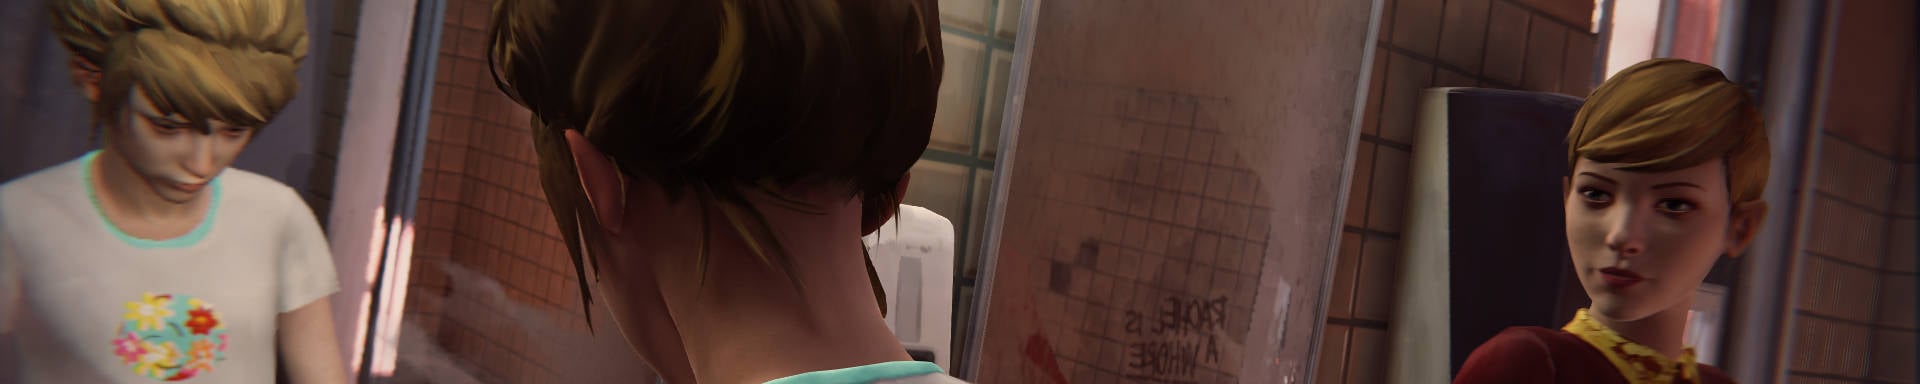 New Life is Strange game Square Enix Presents March 2021 slice